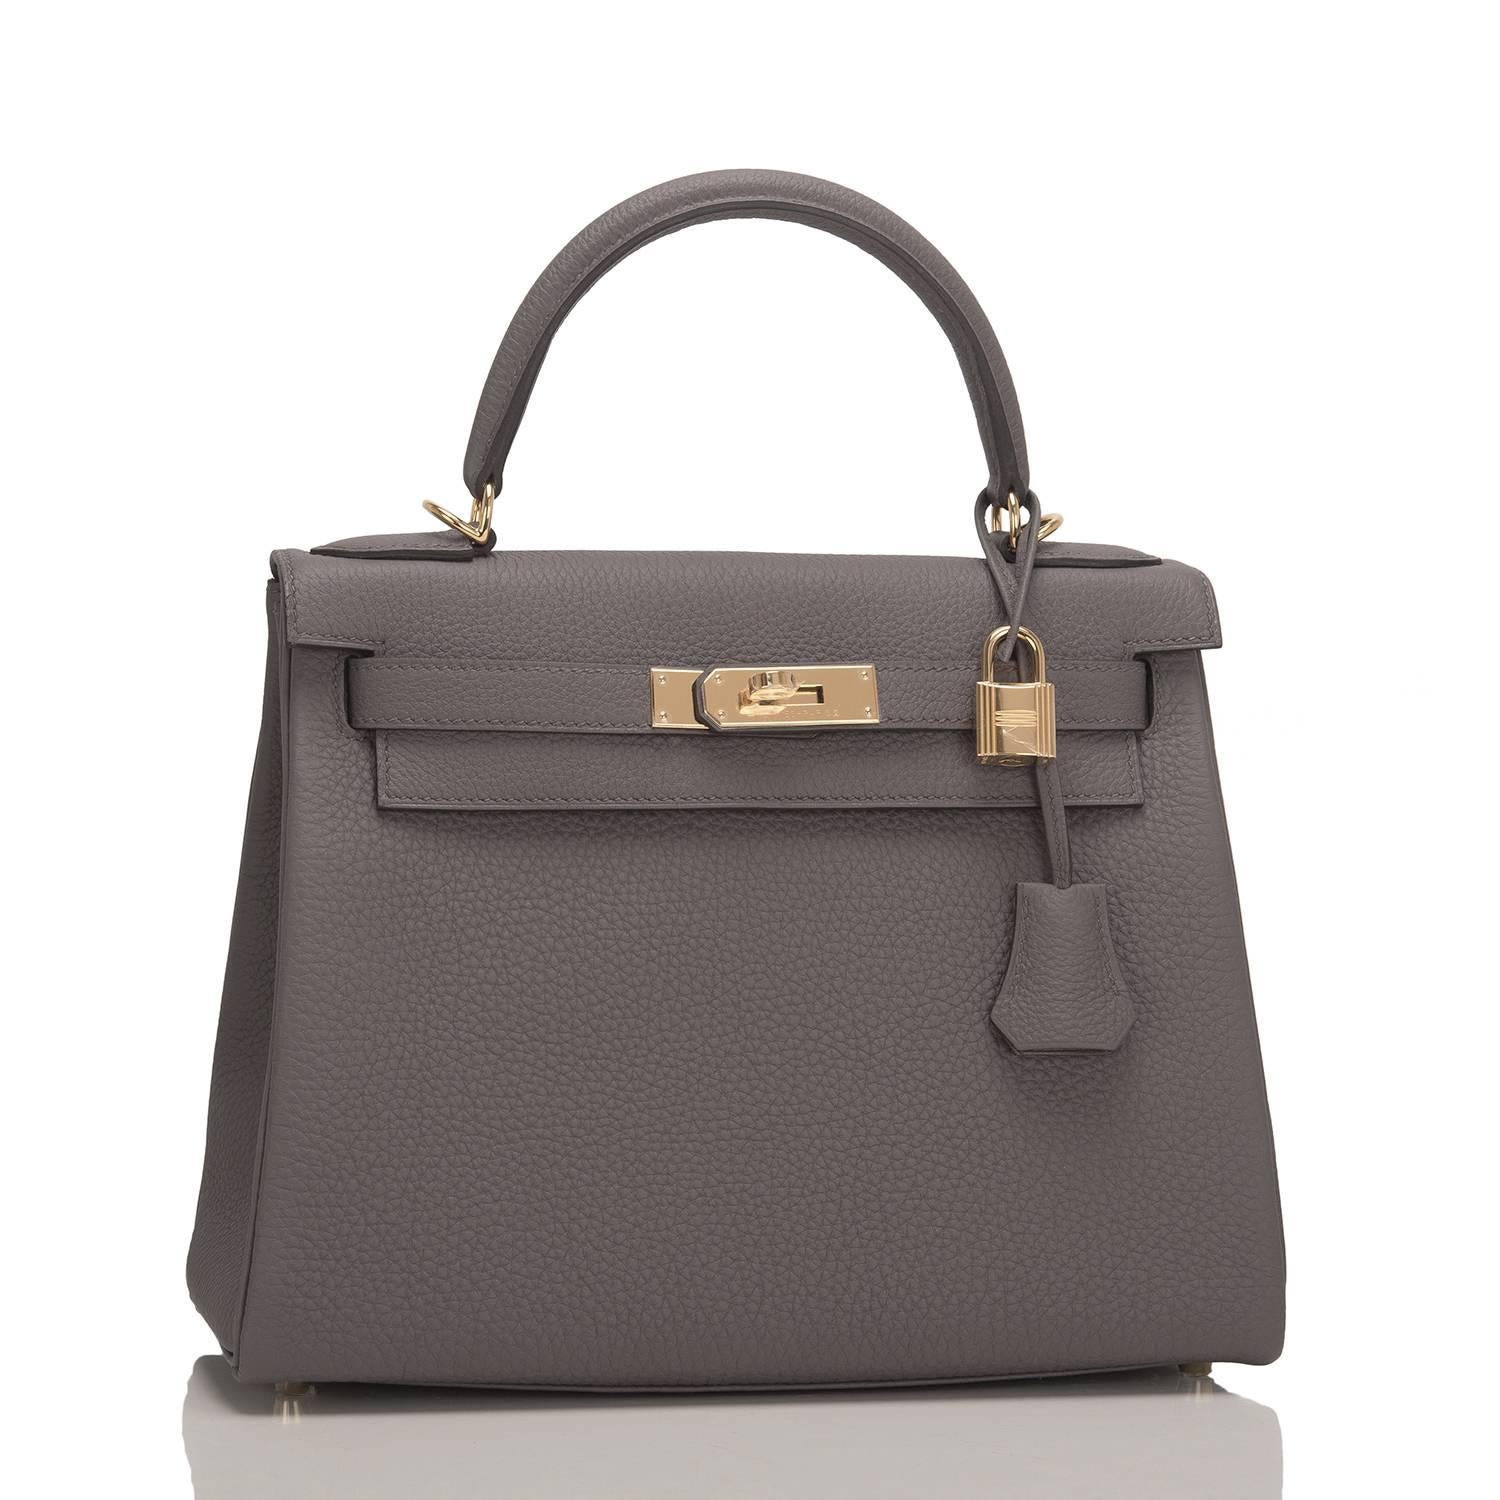 Hermes Etain Kelly 28cm of togo leather with gold hardware.

This Kelly in the Retourne style has tonal stitching, a front toggle closure, a clochette with lock and two keys, a single rolled handle and an optional shoulder strap.

The interior